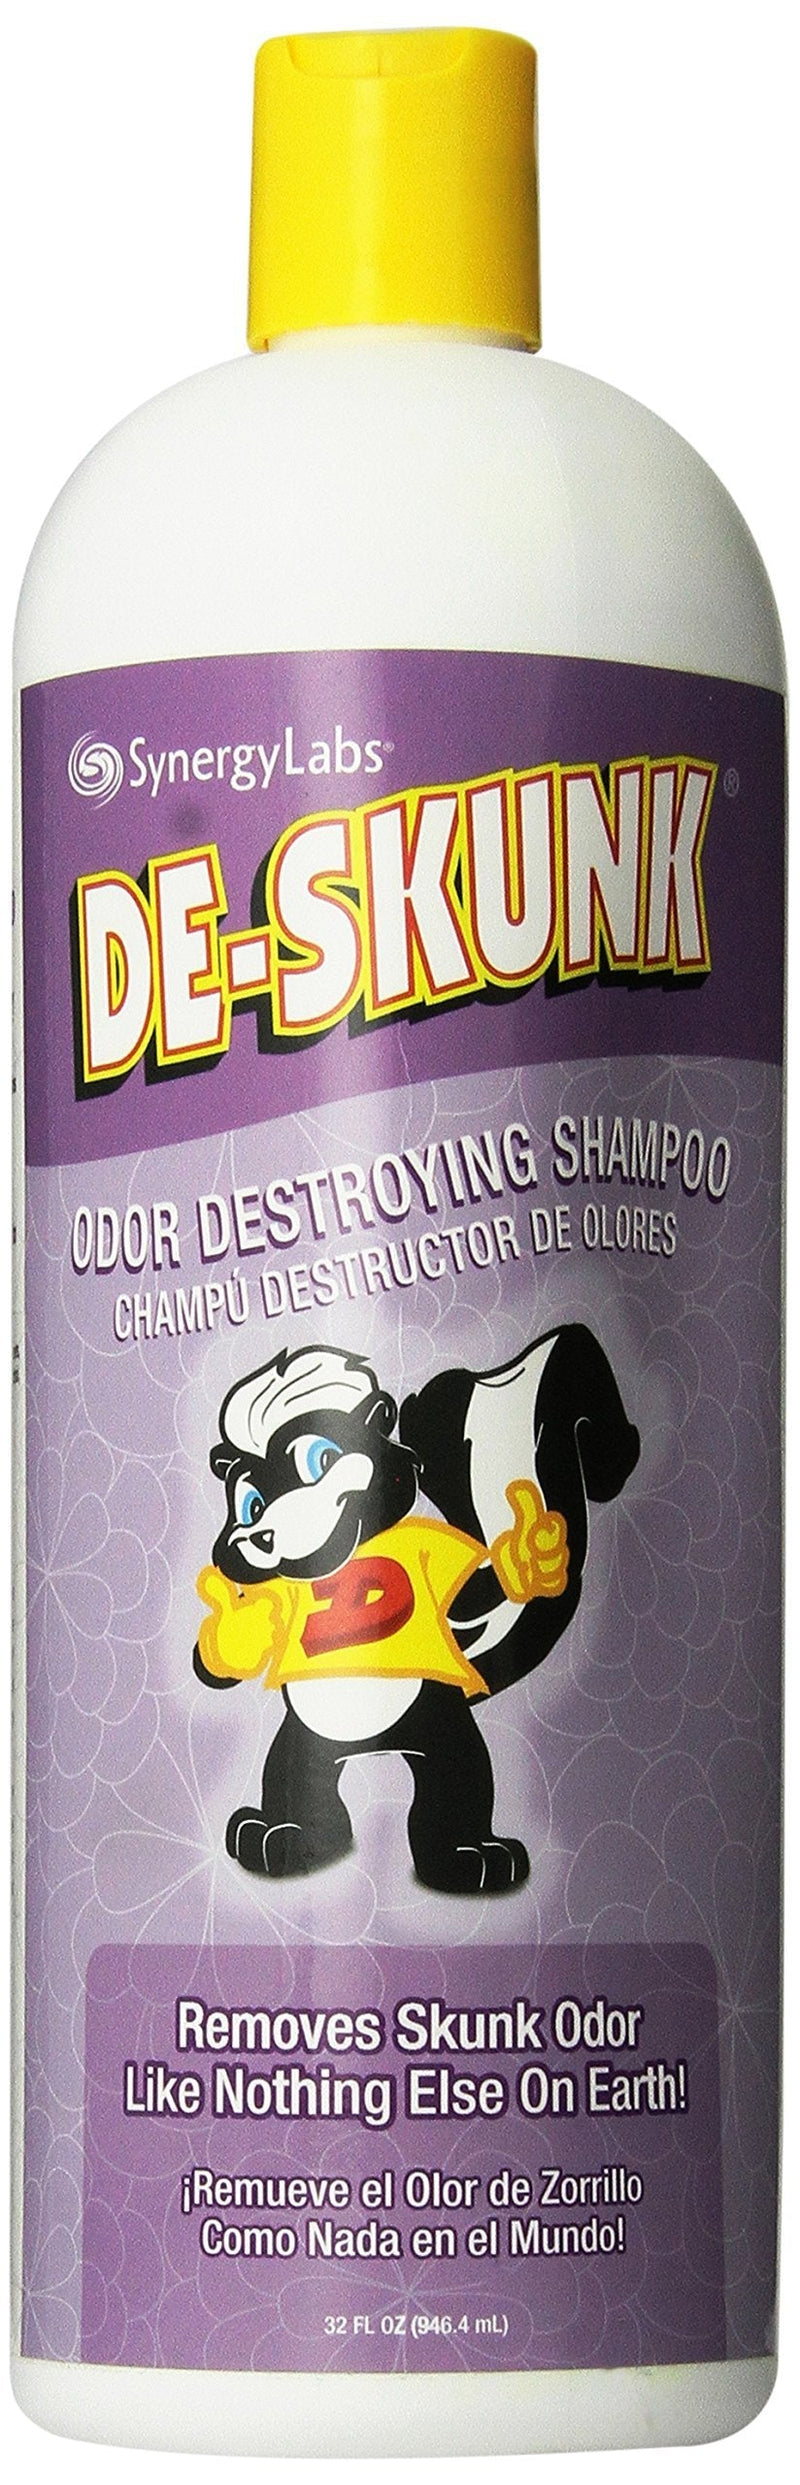 De-Skunk Odor Destroying Shampoo – Formulated with World’s Most Powerful De-Greasers to Remove Skunk Odor, Guaranteed – Only Skunk Shampoo You Need - Keep On Hand for Emergencies (32 oz.) - PawsPlanet Australia